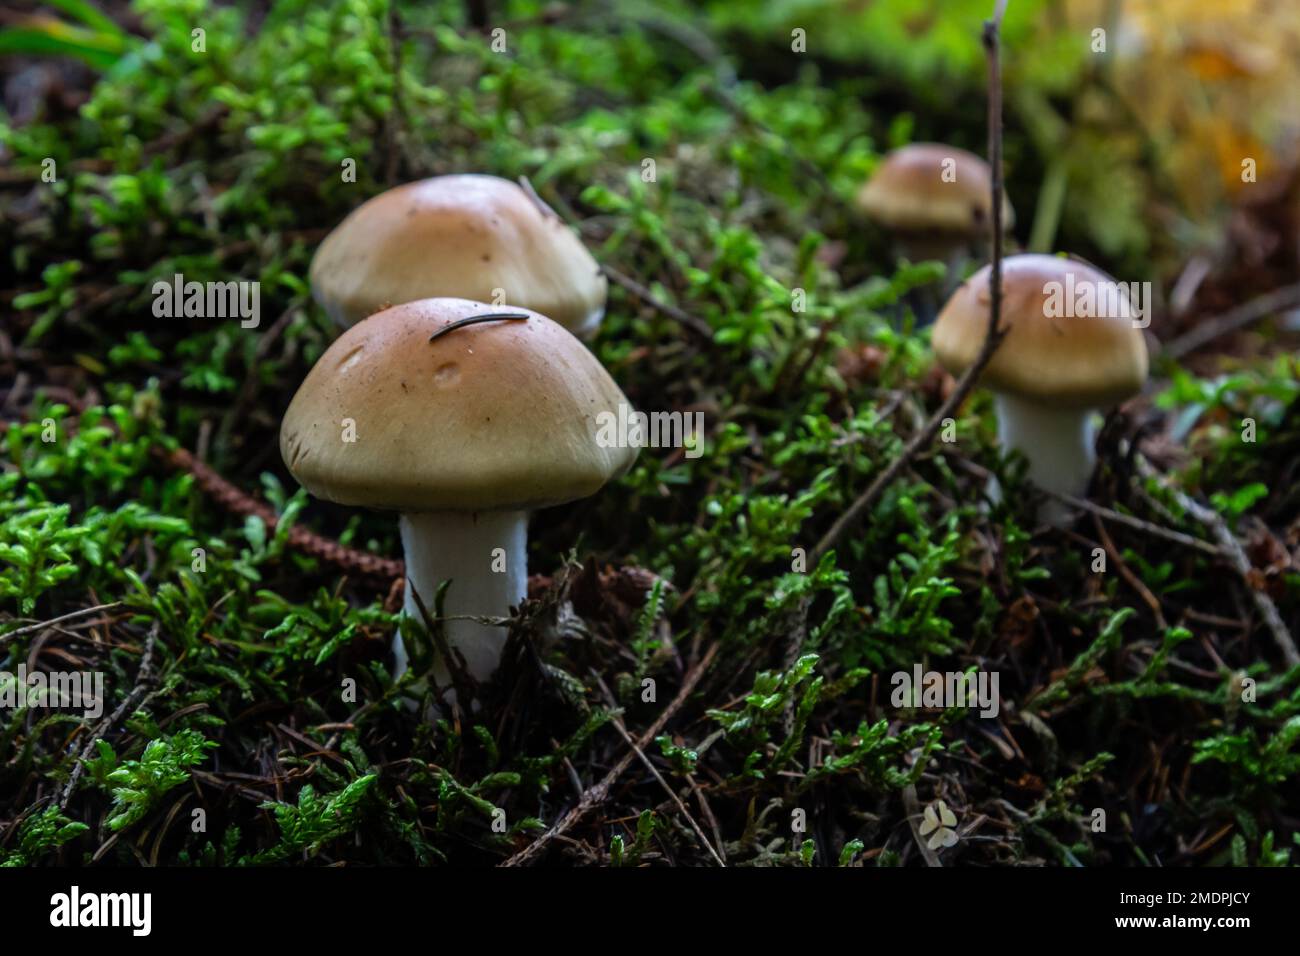 Hygrophorus olivaceoalbus, known as the olive wax cap, wild mushrooms. Stock Photo